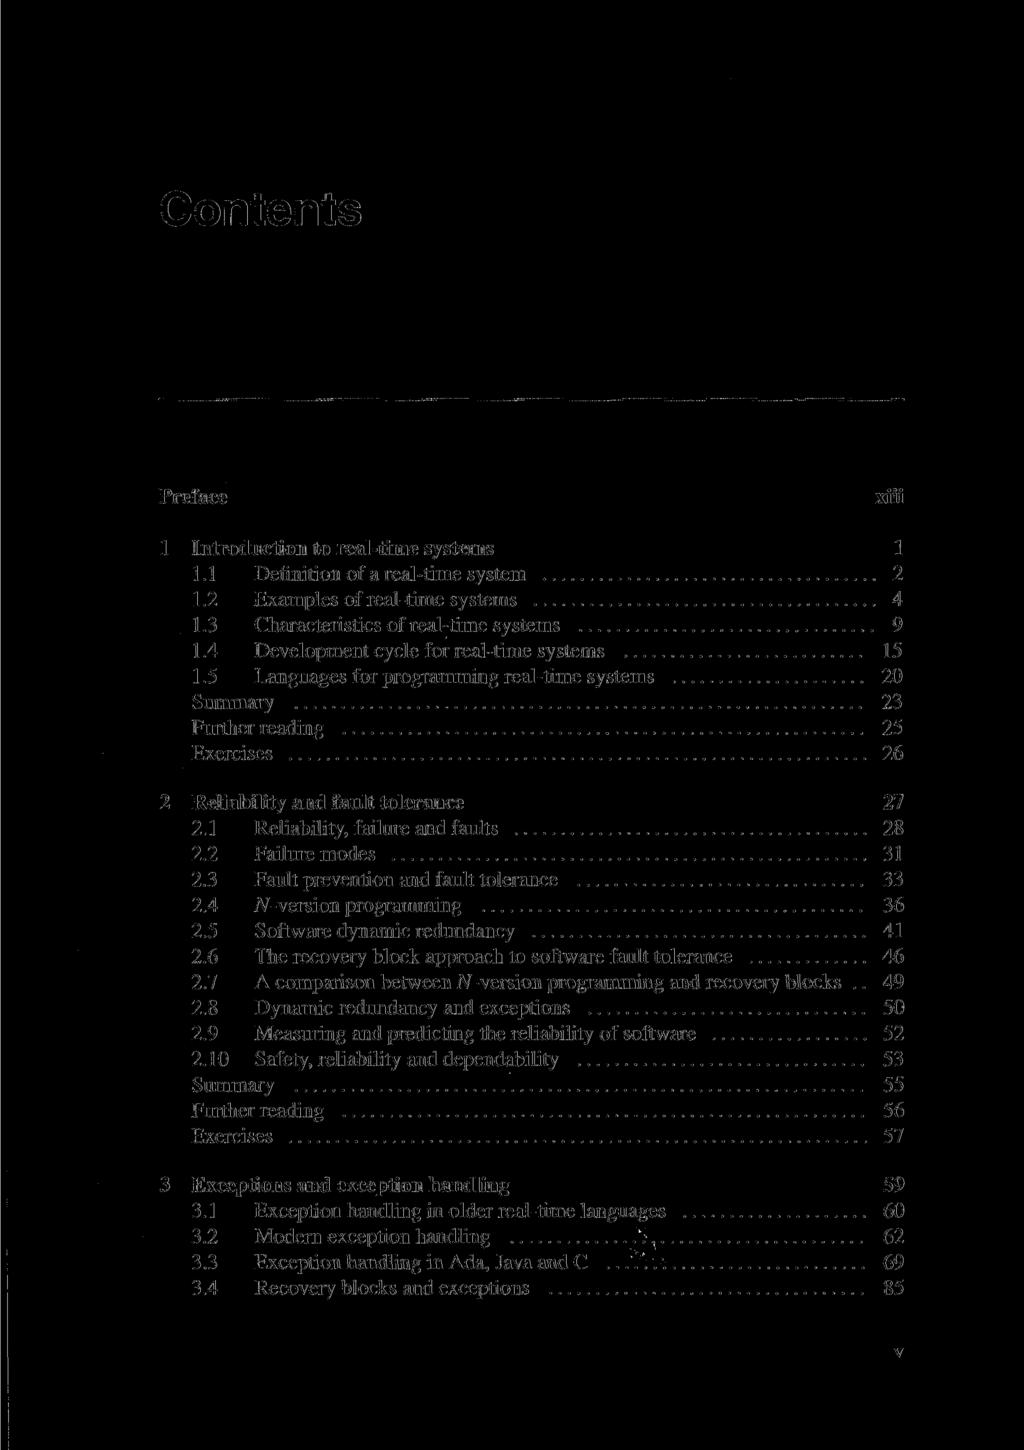 Contents Preface xiii 1 Introduction to real-time systems 1 1.1 Definition of a real-time system 2 1.2 Examples of real-time systems 4 1.3 Characteristics of real-time systems 9 1.